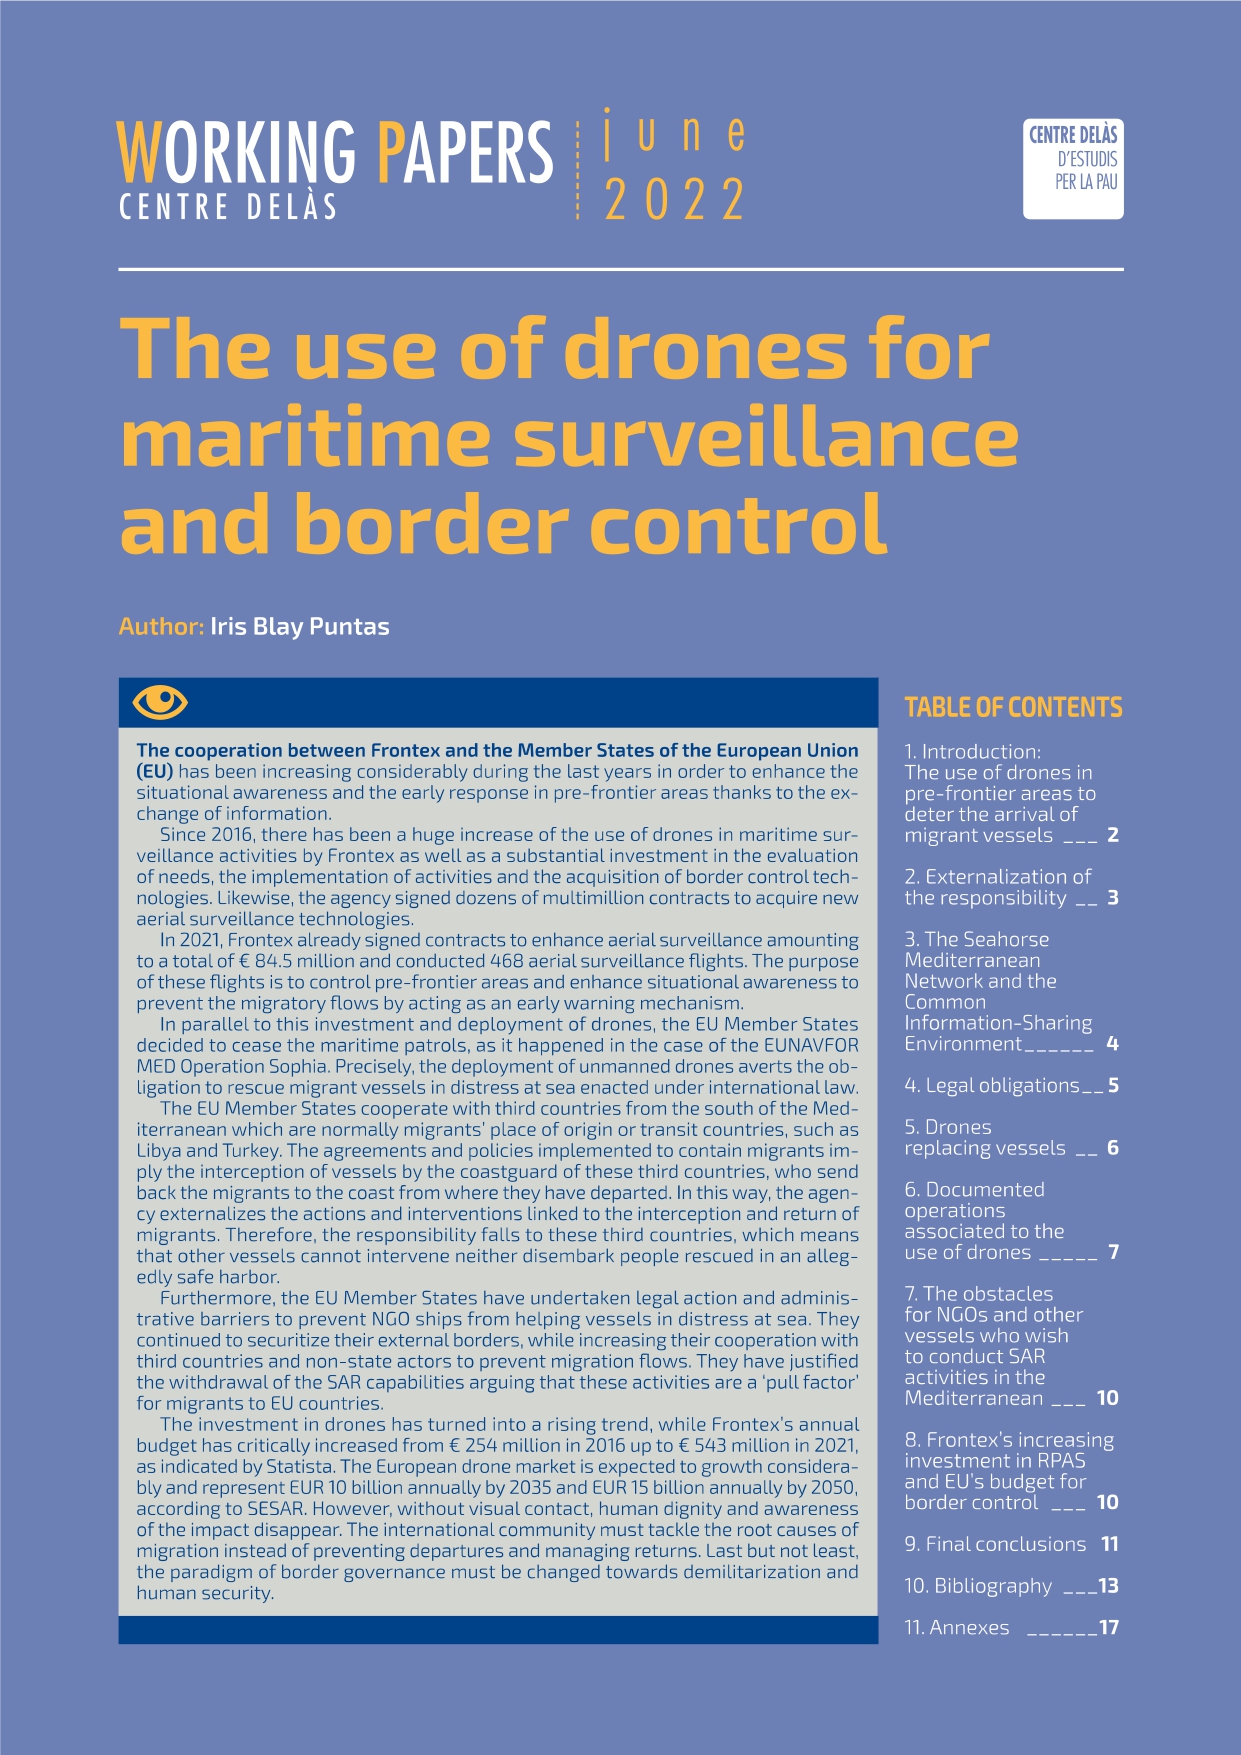 Working Paper “The use of drones for maritime surveillance and border control”